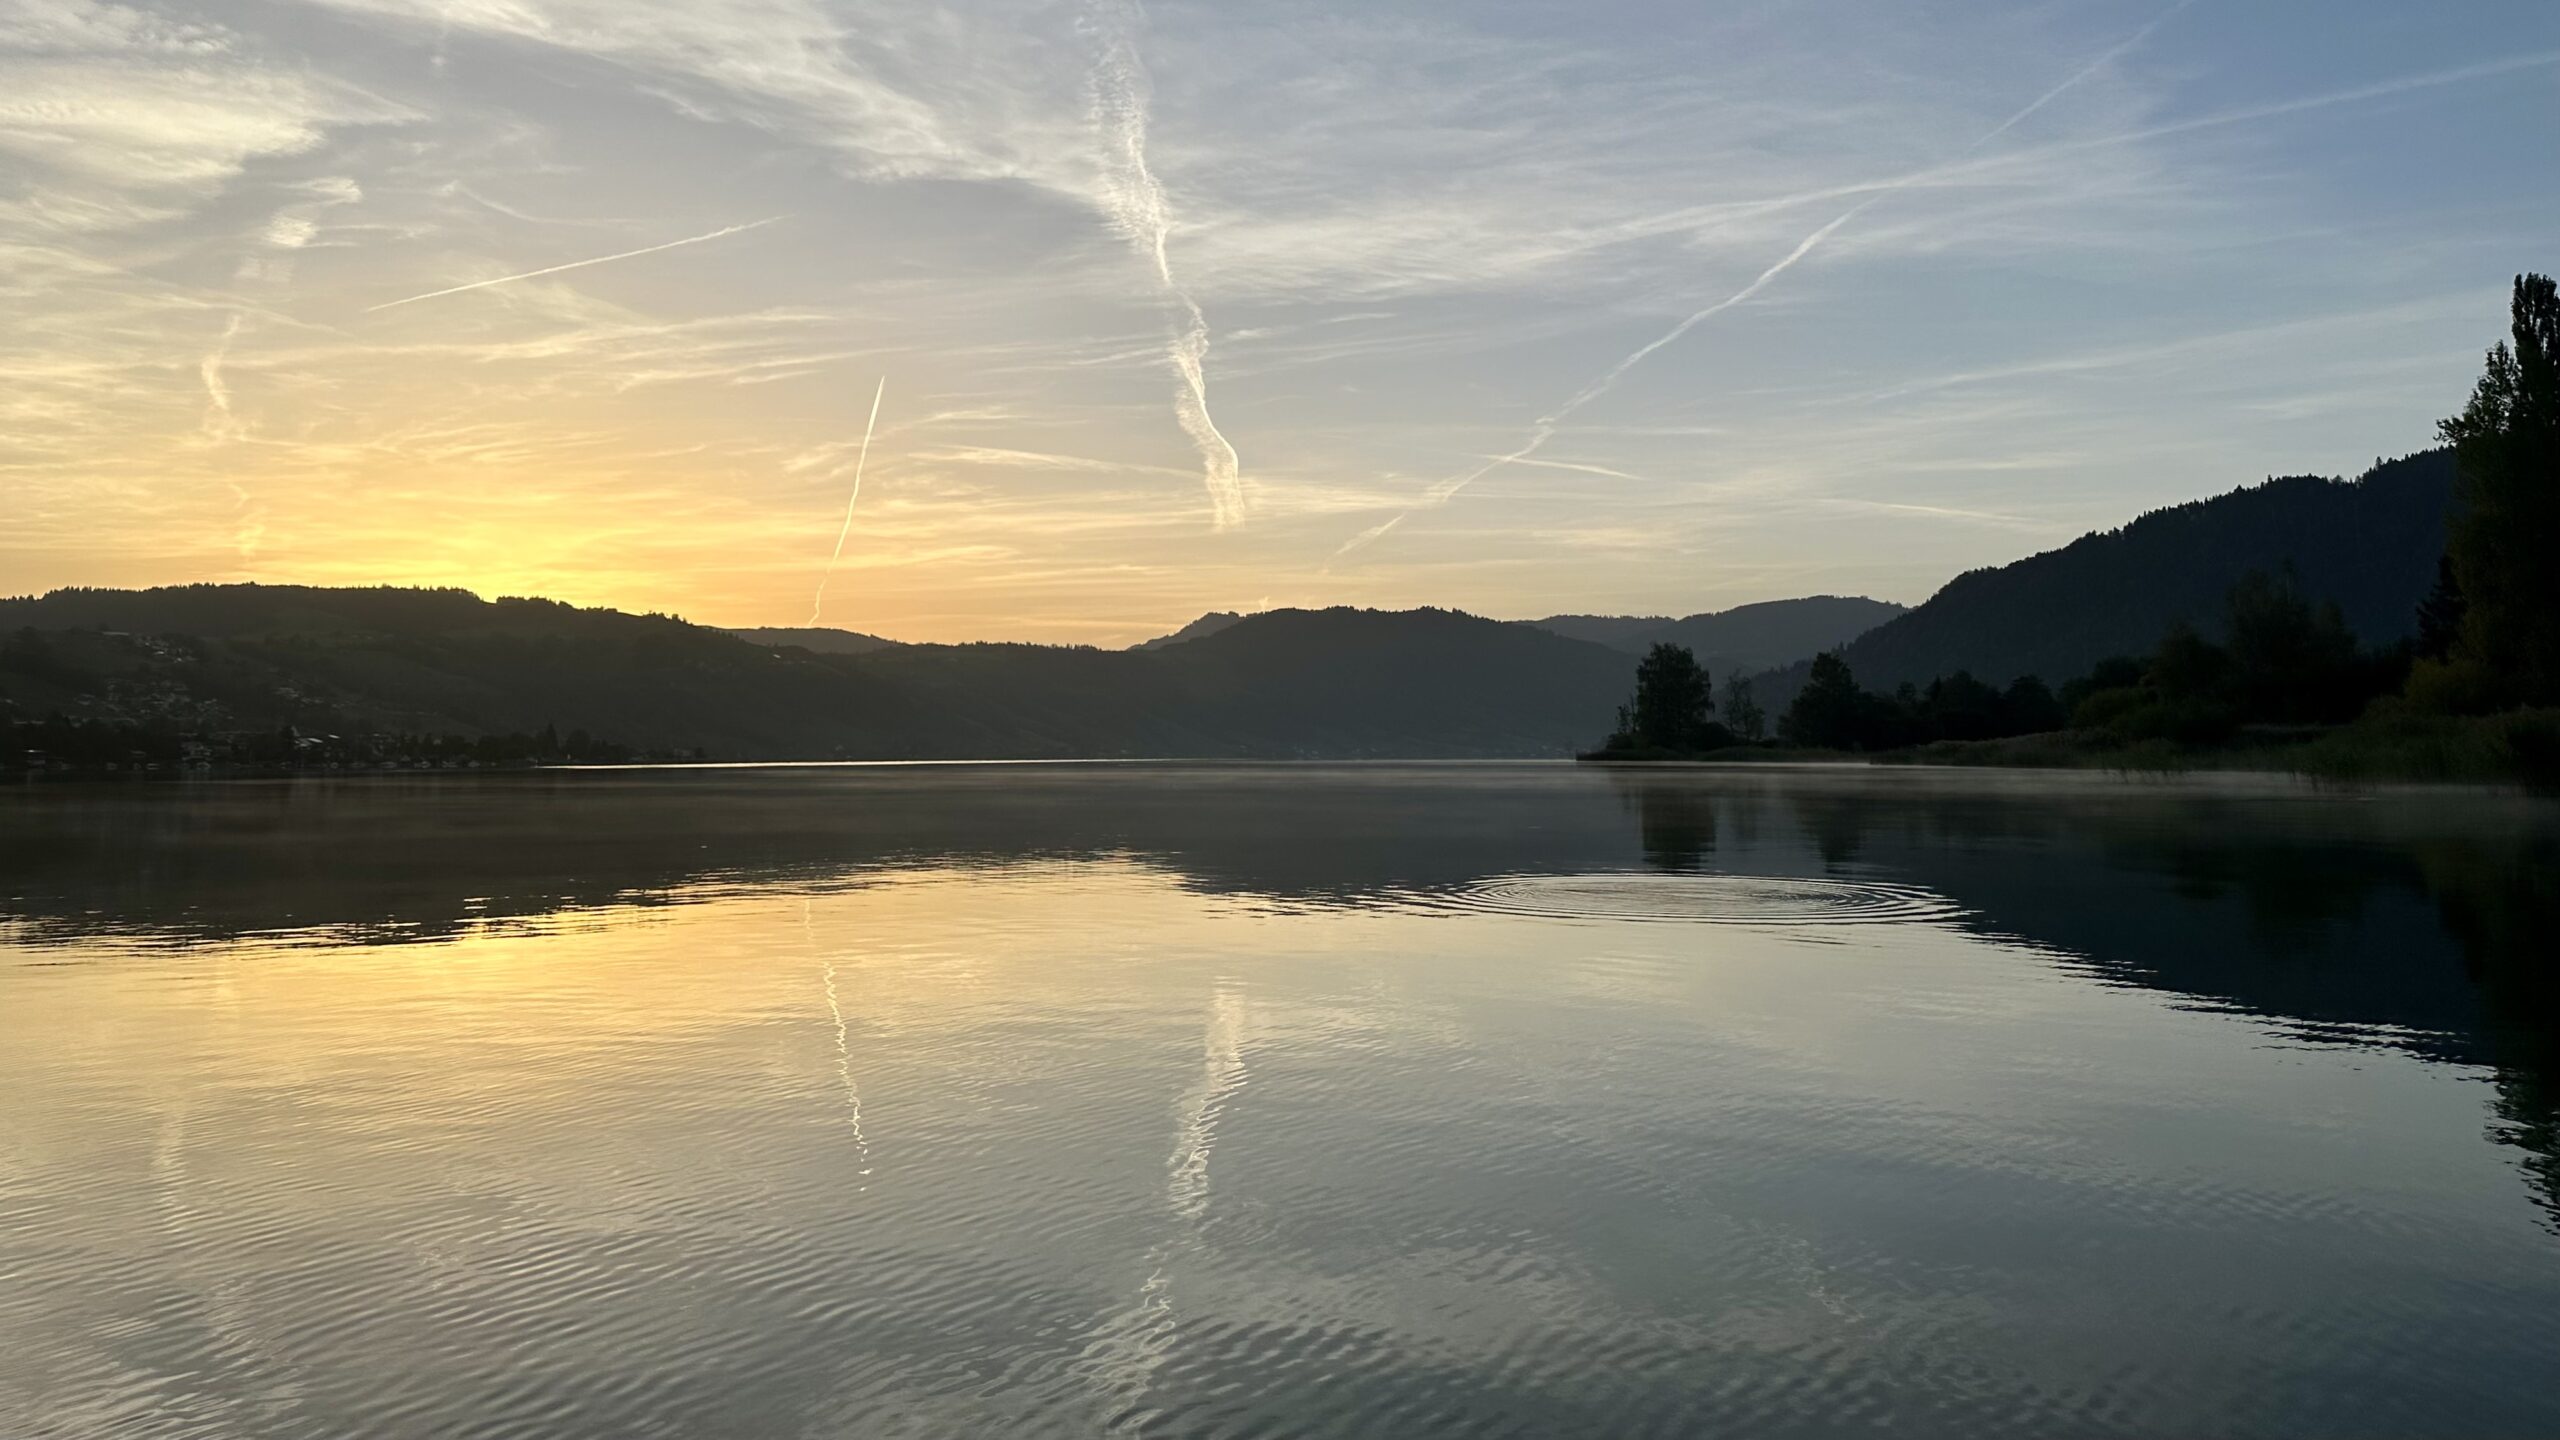 View of lake and hills taken from a SUP just before sunrise with a golden glow where the sun will soon appear. The lake has a few ripples but otherwise reflects the sky, which has more contrails than natural clouds.